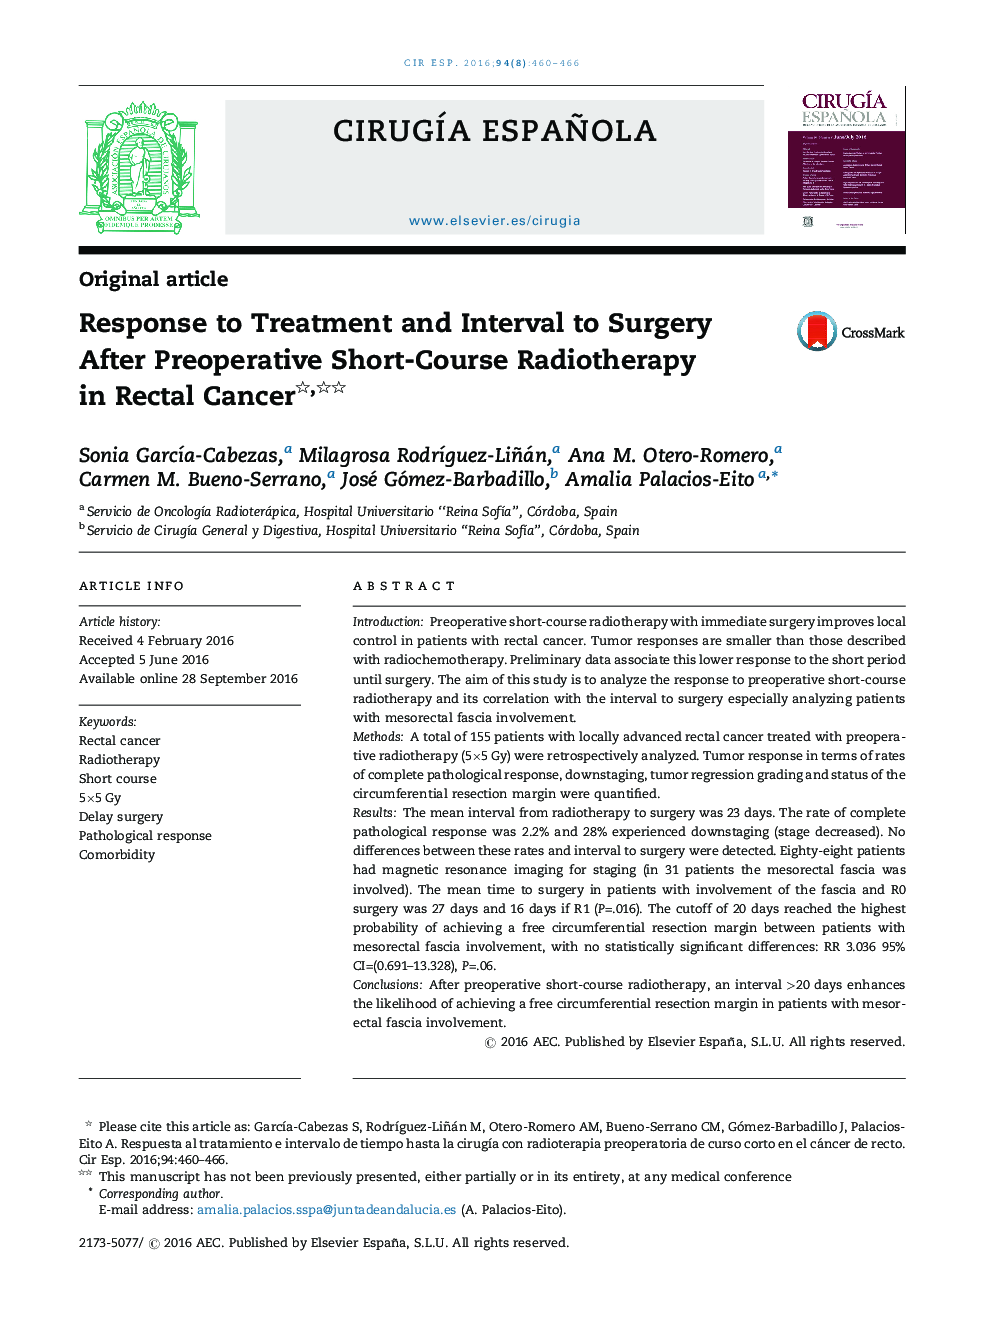 Response to Treatment and Interval to Surgery After Preoperative Short-Course Radiotherapy in Rectal Cancer